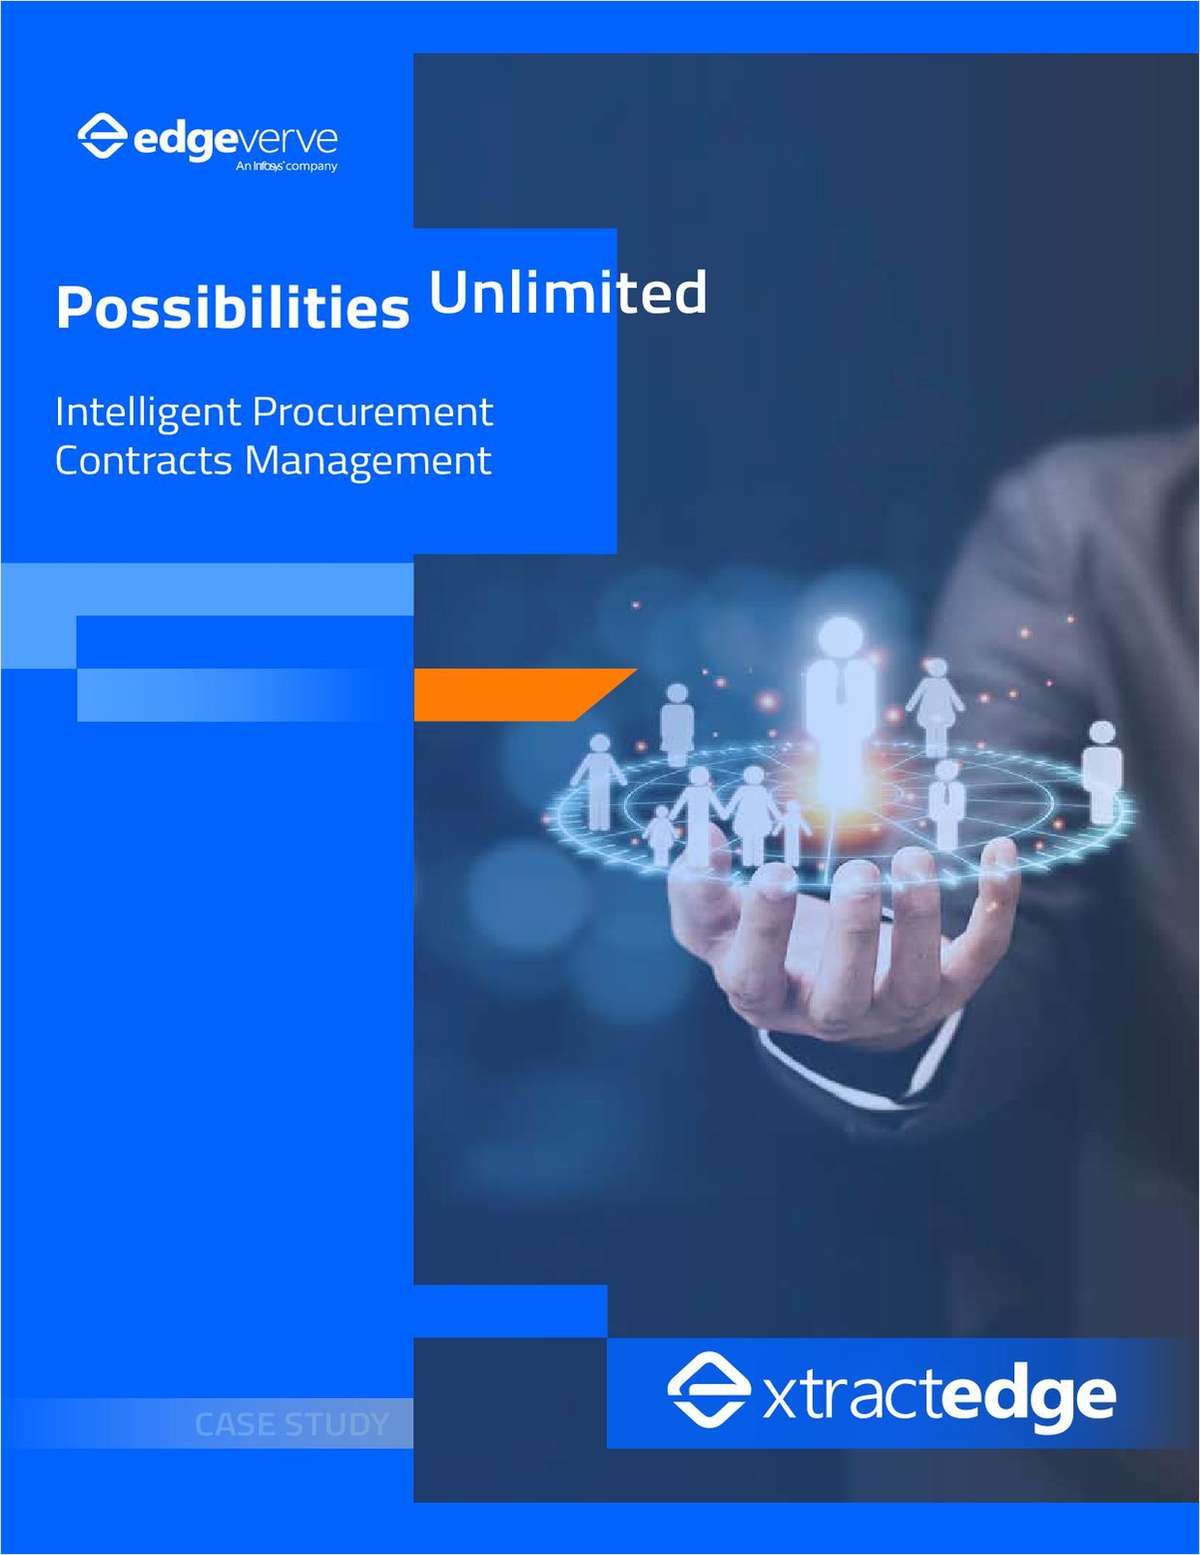 Well-managed procurement contracts keep enterprises safe from risks and obligations. Download this white paper to learn how you can handle procurement contracts more efficiently and address challenges effectively.